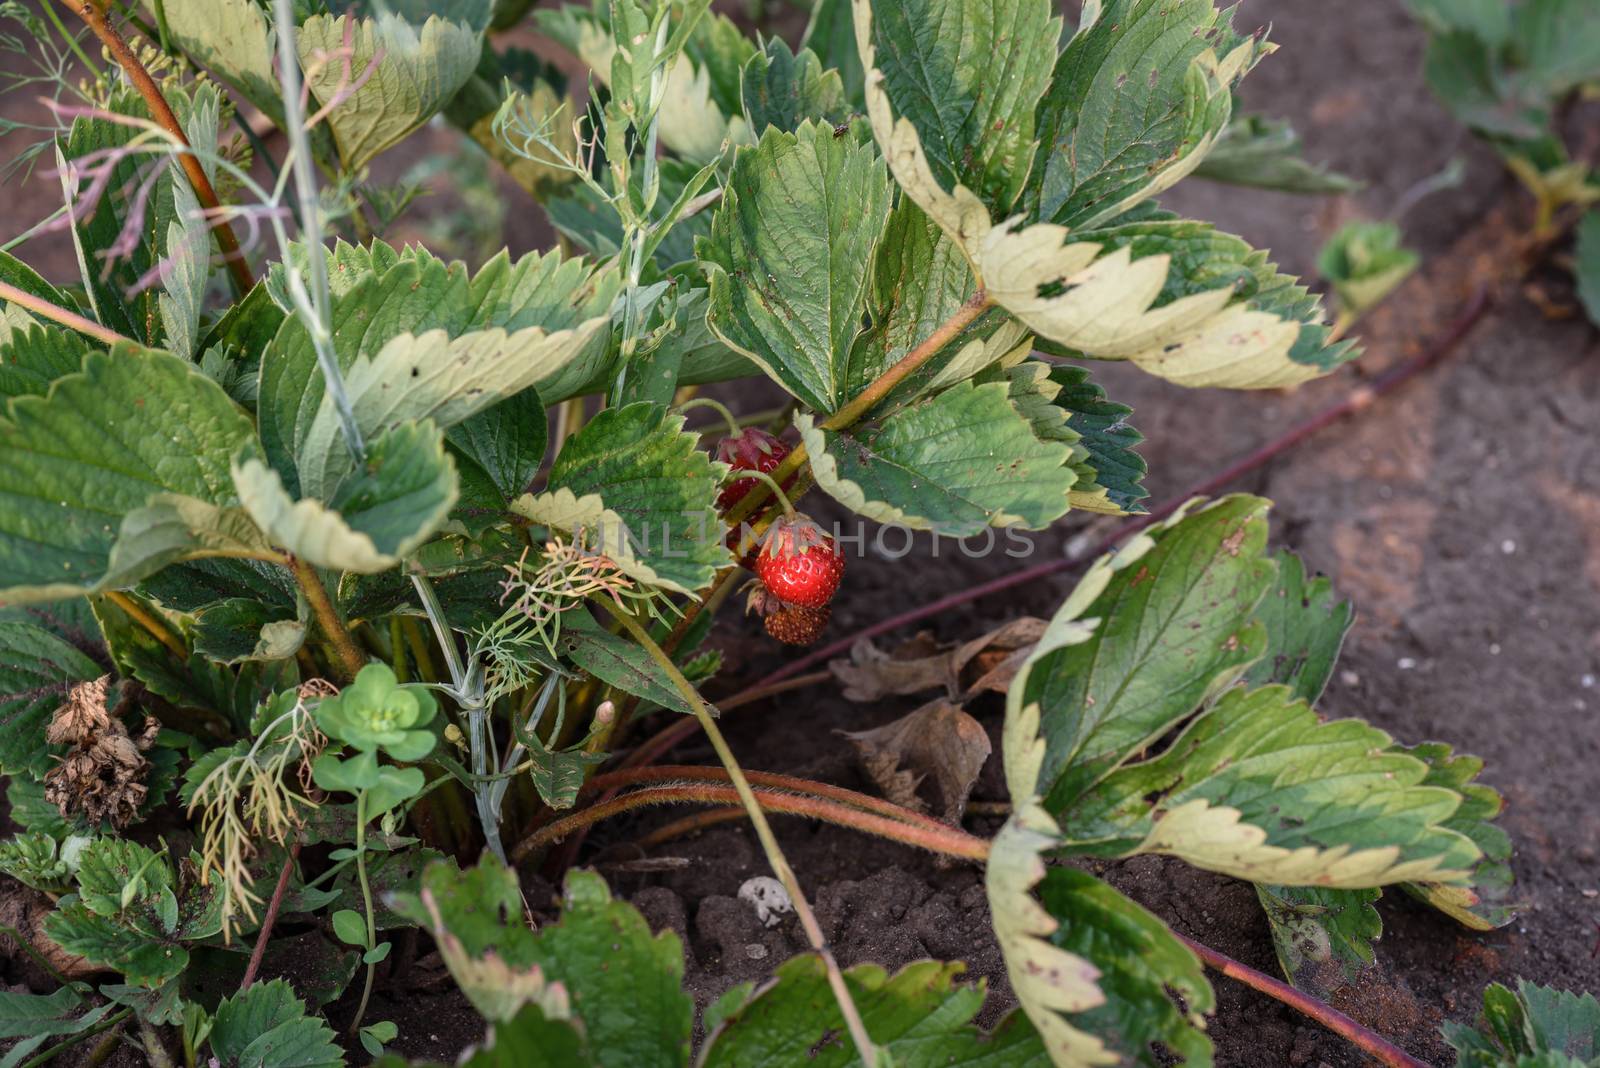 Strawberries growing on a plant close up by Seva_blsv